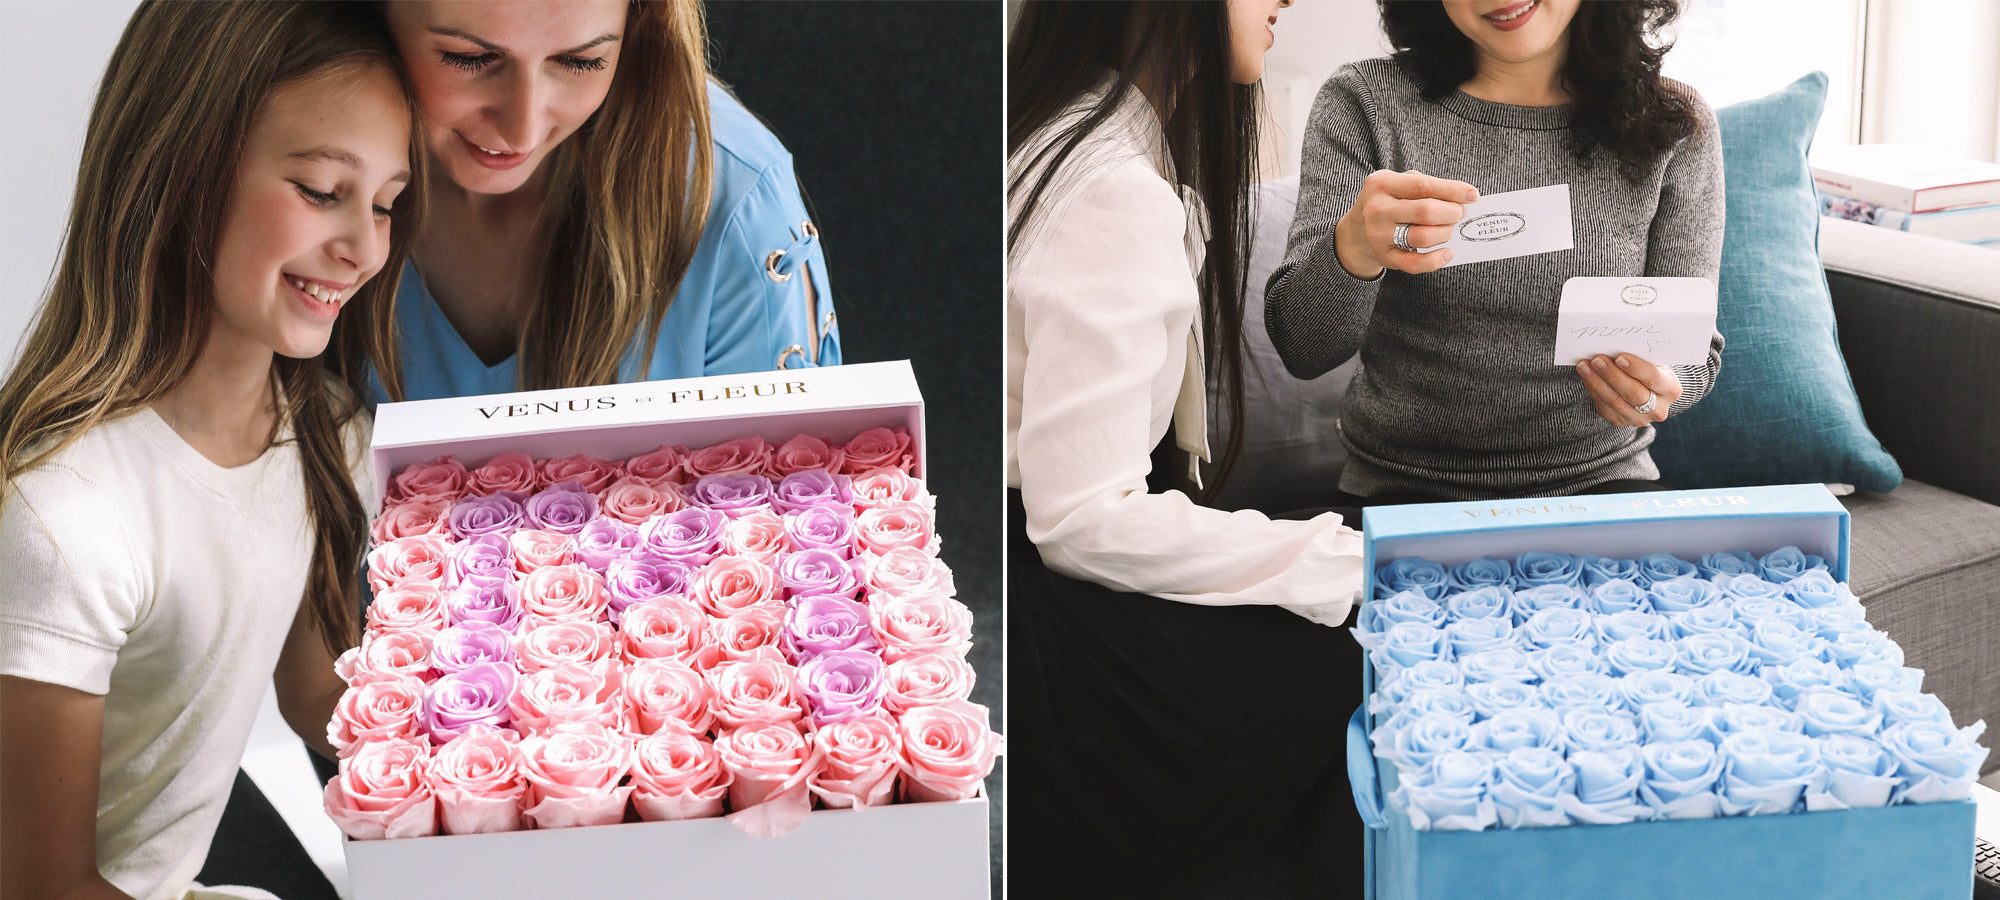 How to Personalize Your Mother’s Day Gift With Meaningful Rose Colors